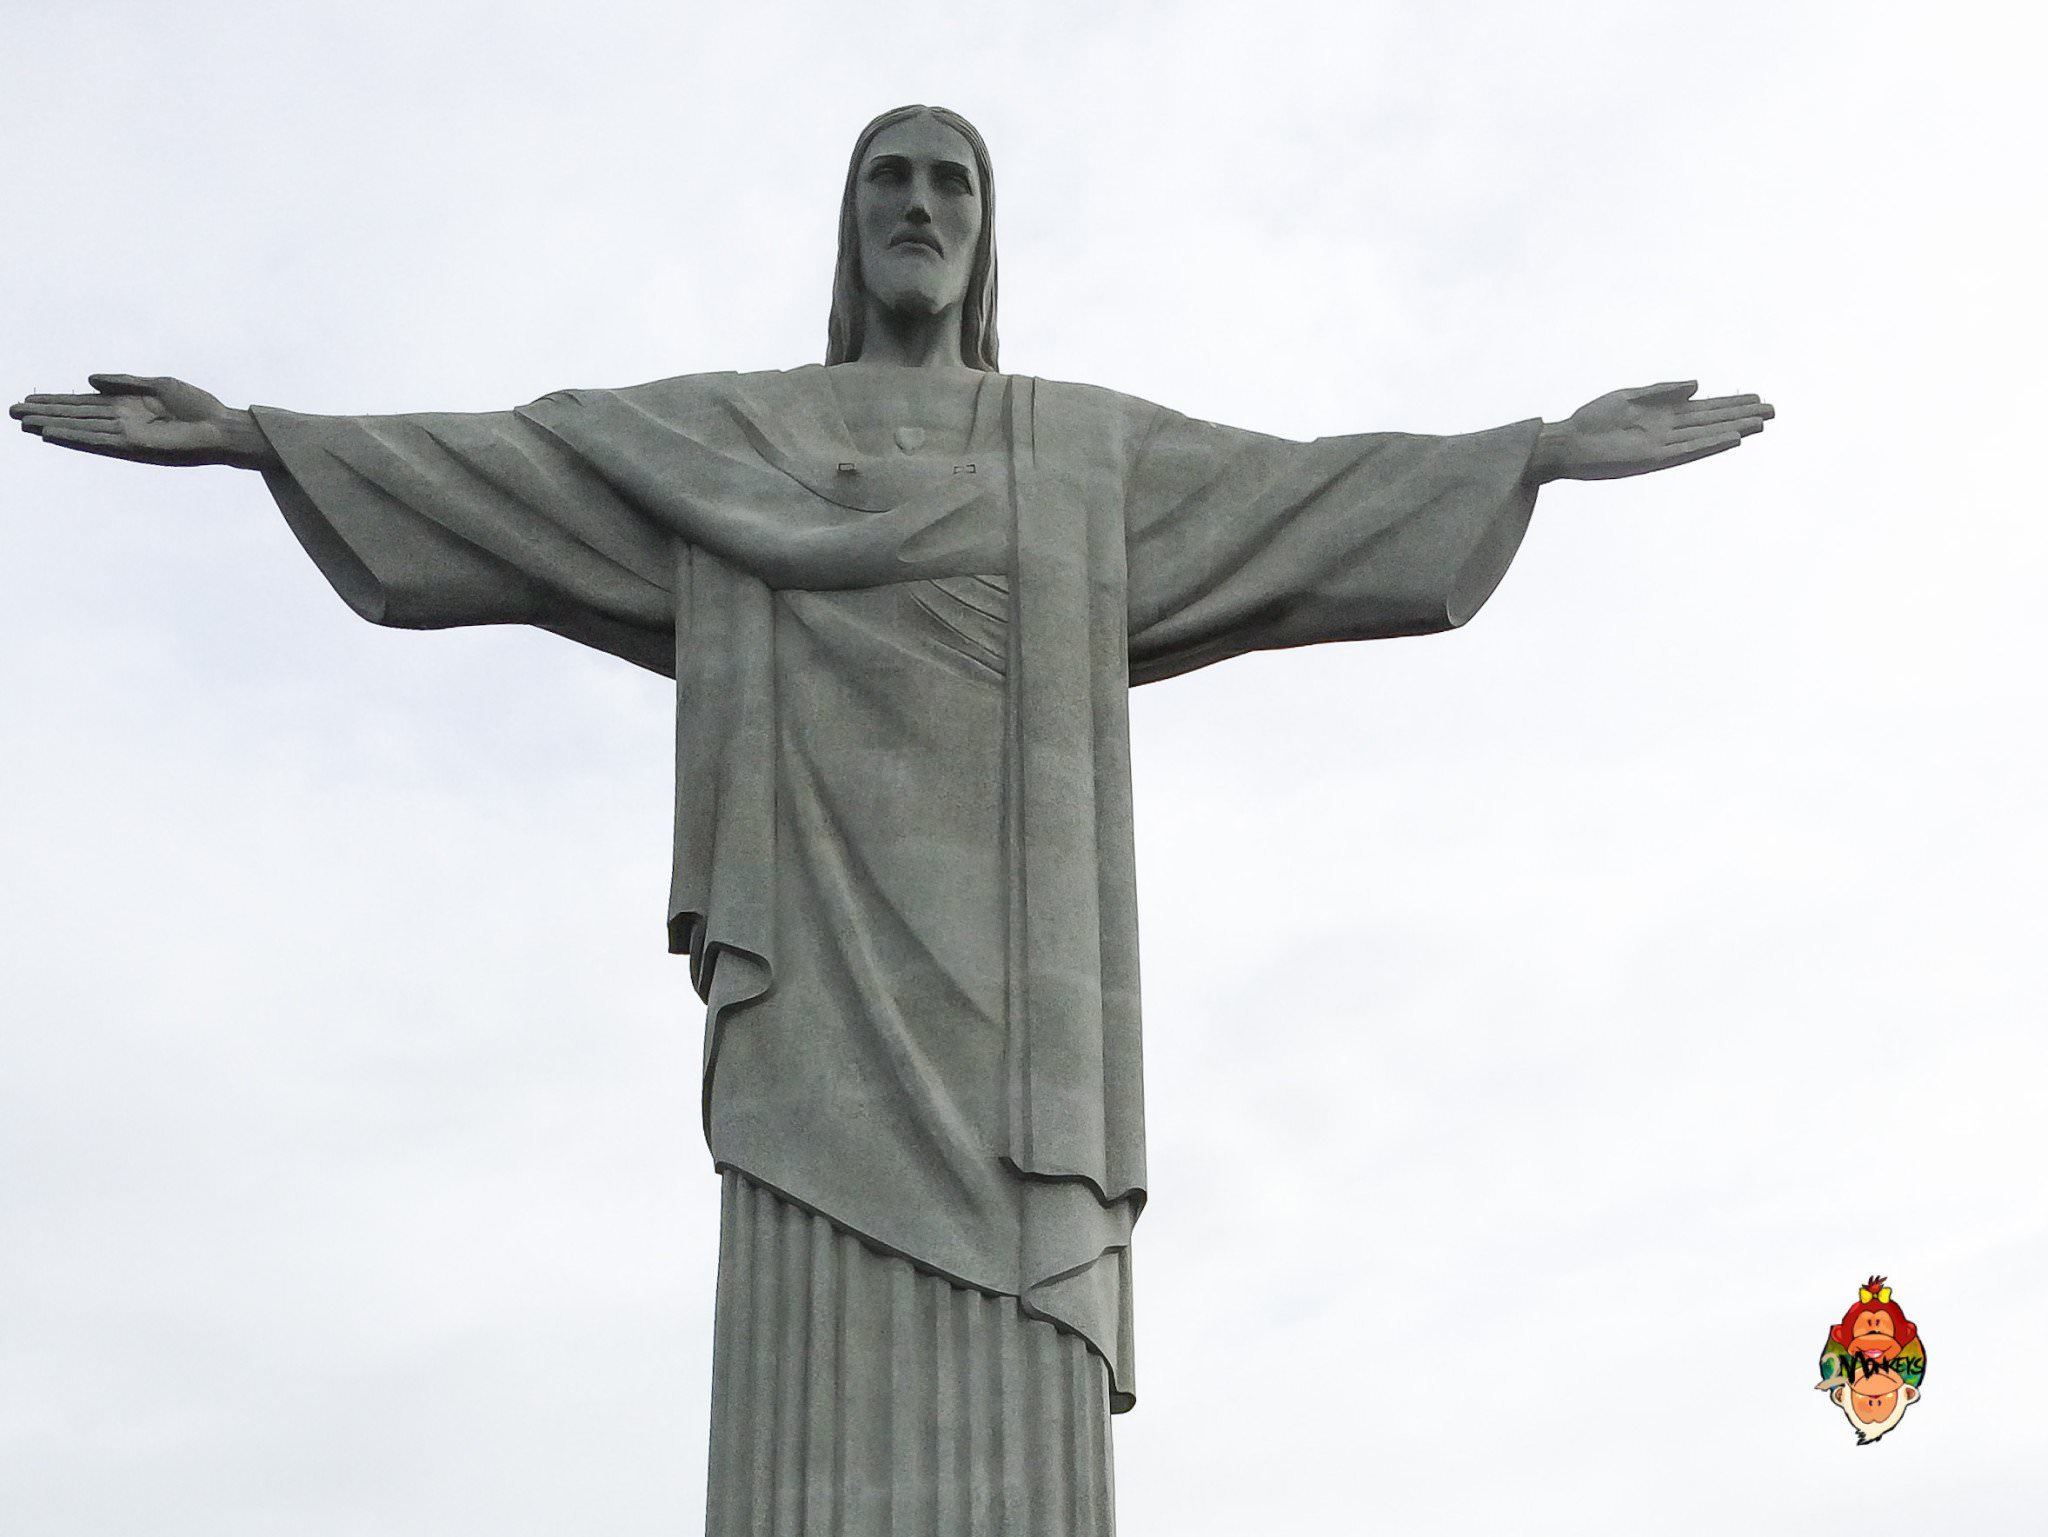 The National Icon of Brazil, Christ the Redeemer